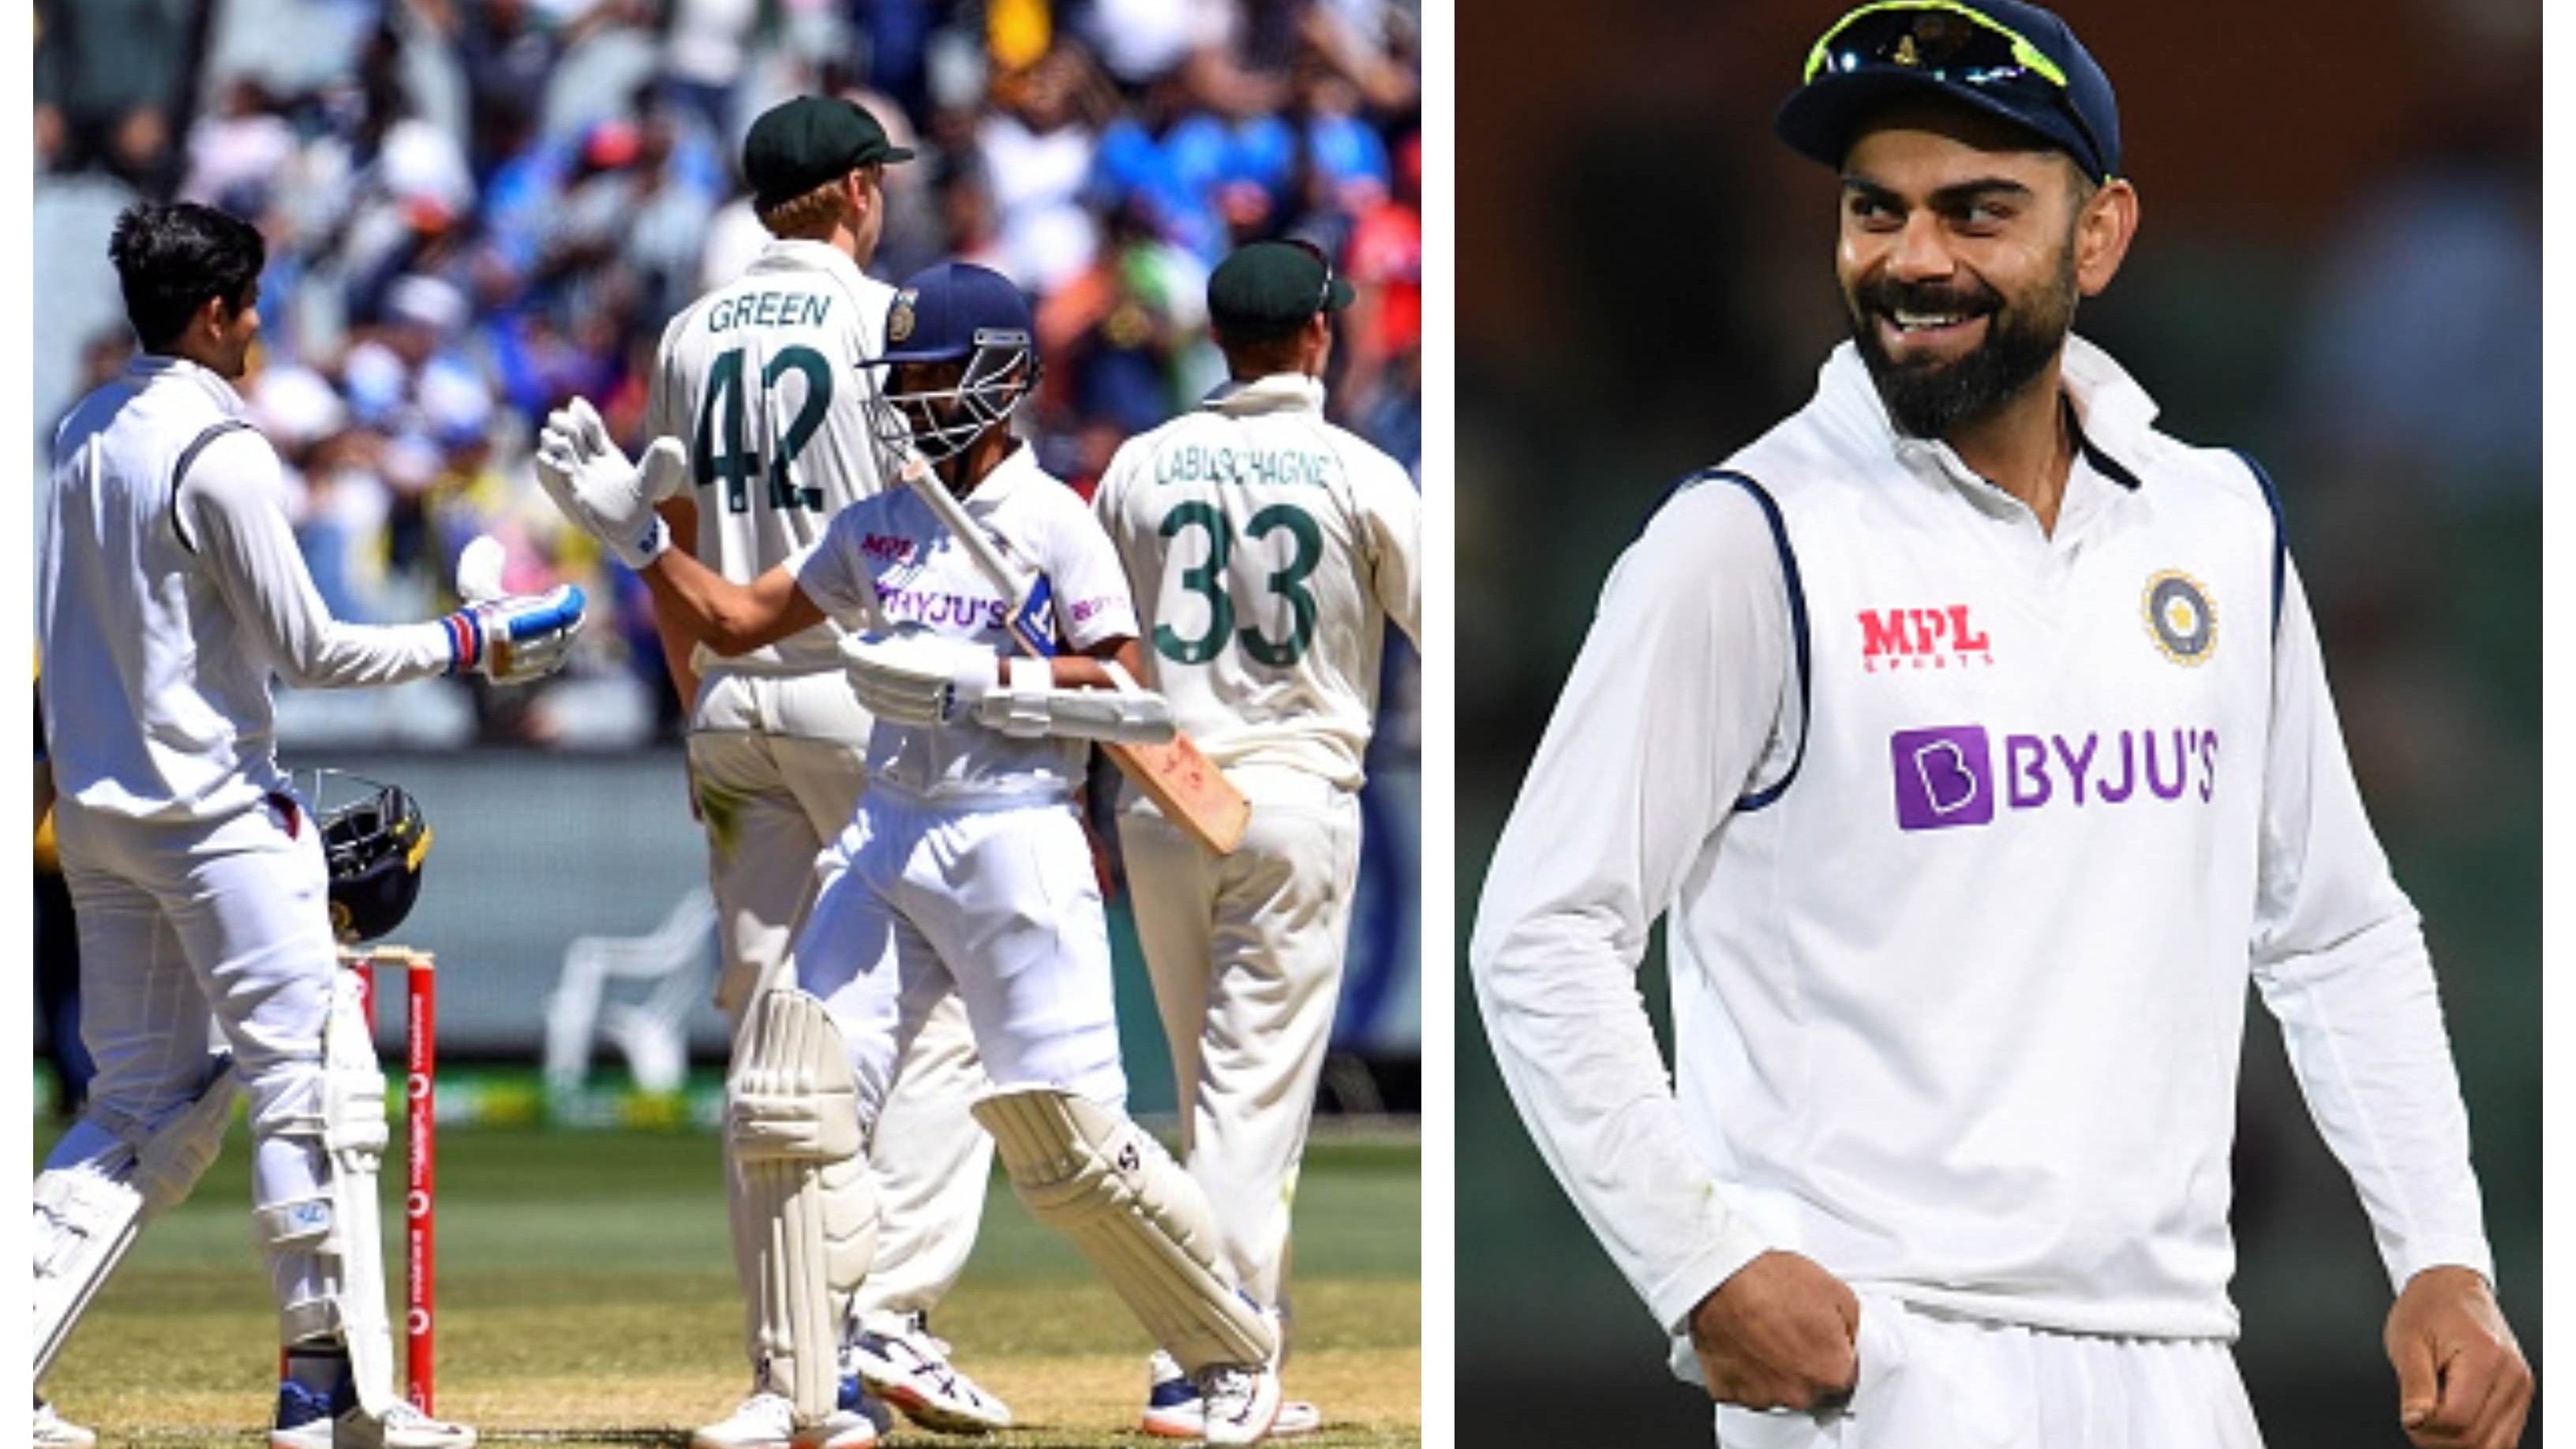 AUS v IND 2020-21: ‘Couldn't be happier for the boys’ – Virat Kohli after India’s thumping win in Melbourne Test